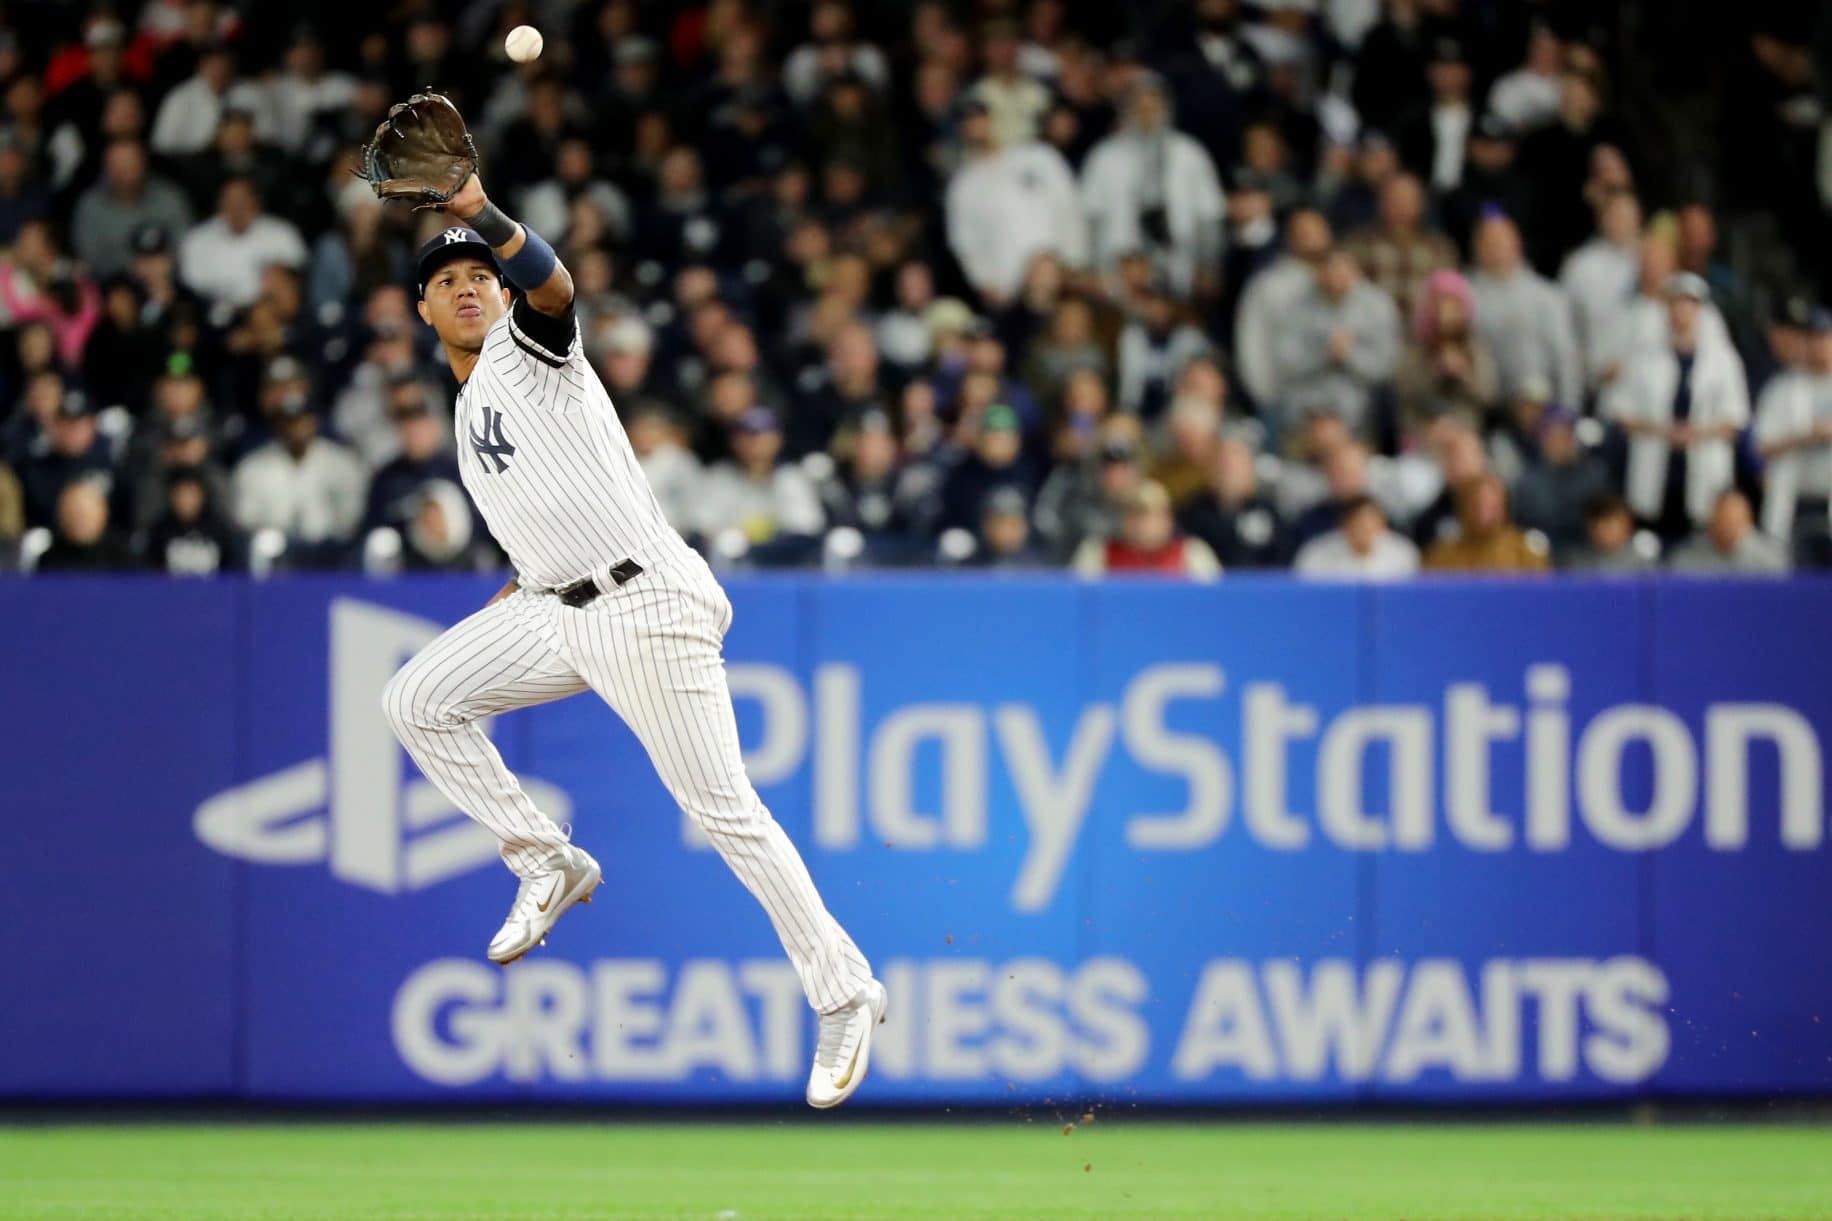 Farewell to a Star: Highlights of Starlin Castro's time with the New York Yankees